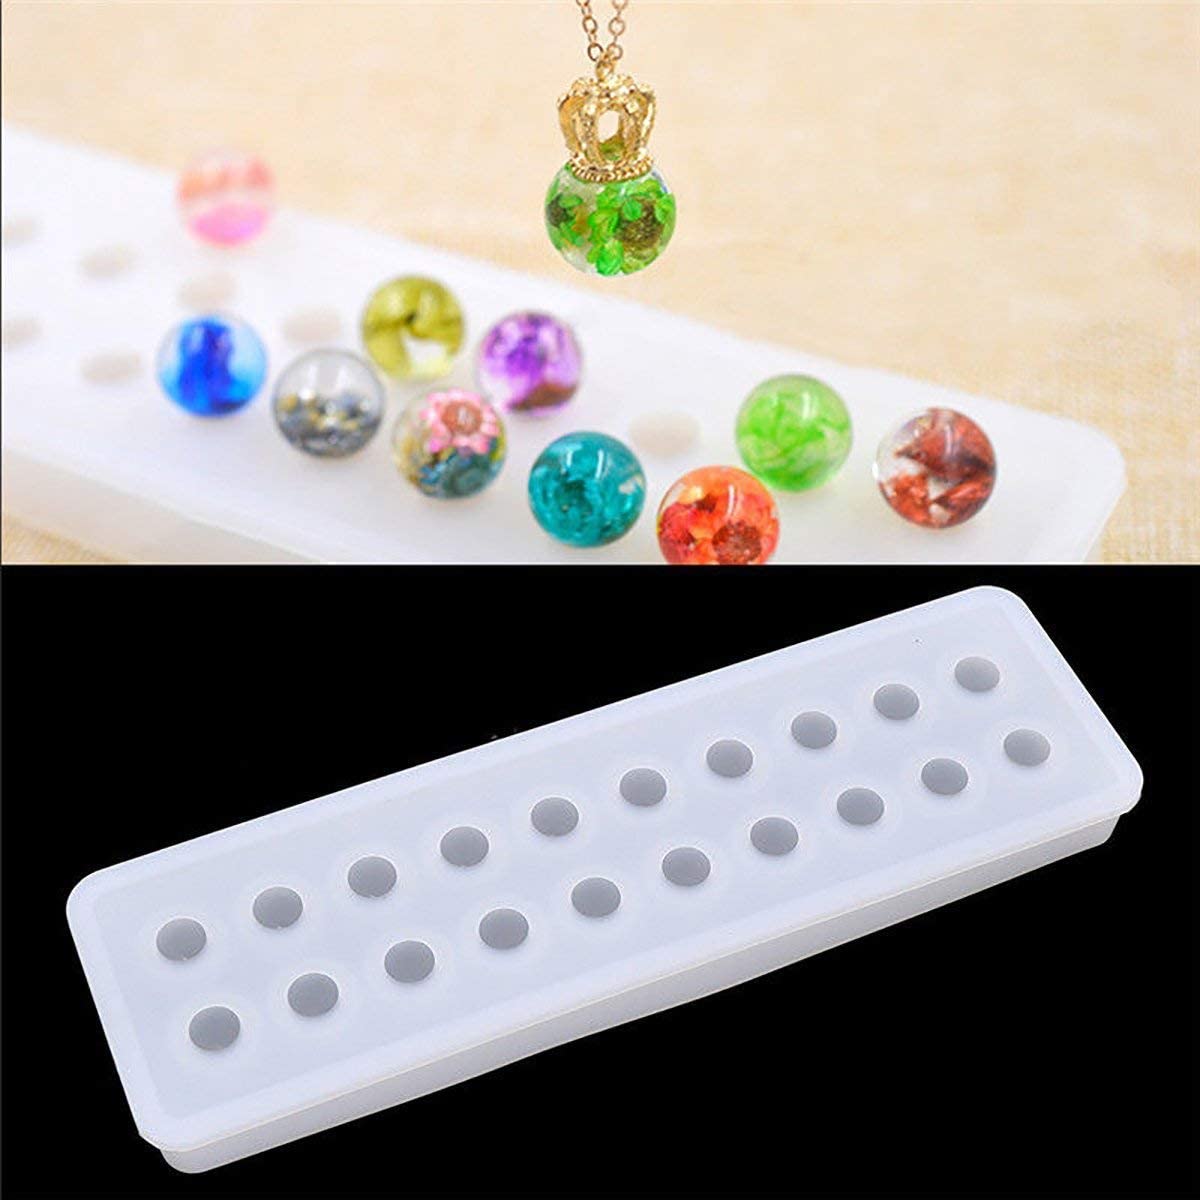 Silicone Mold Set Pendant Mold for DIY Necklace Bracelet Jewelry Making Craft - 20 Cavities